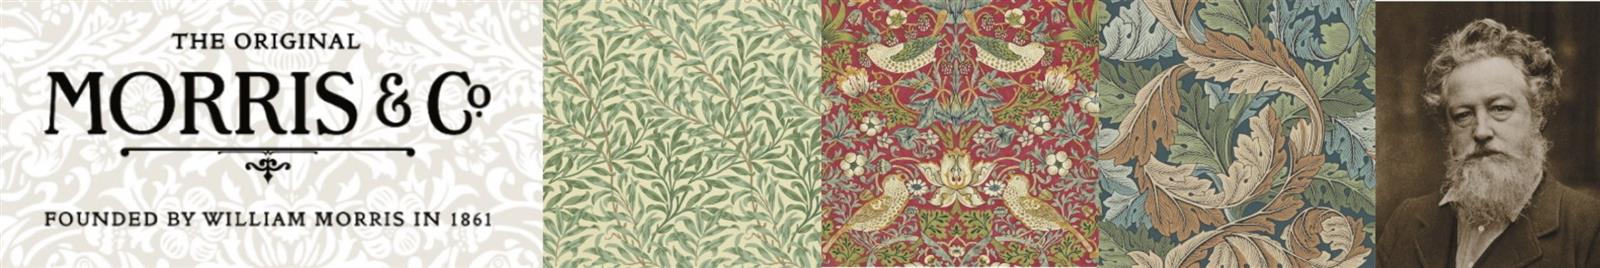 Morris and Co Wallpaper-Scroll